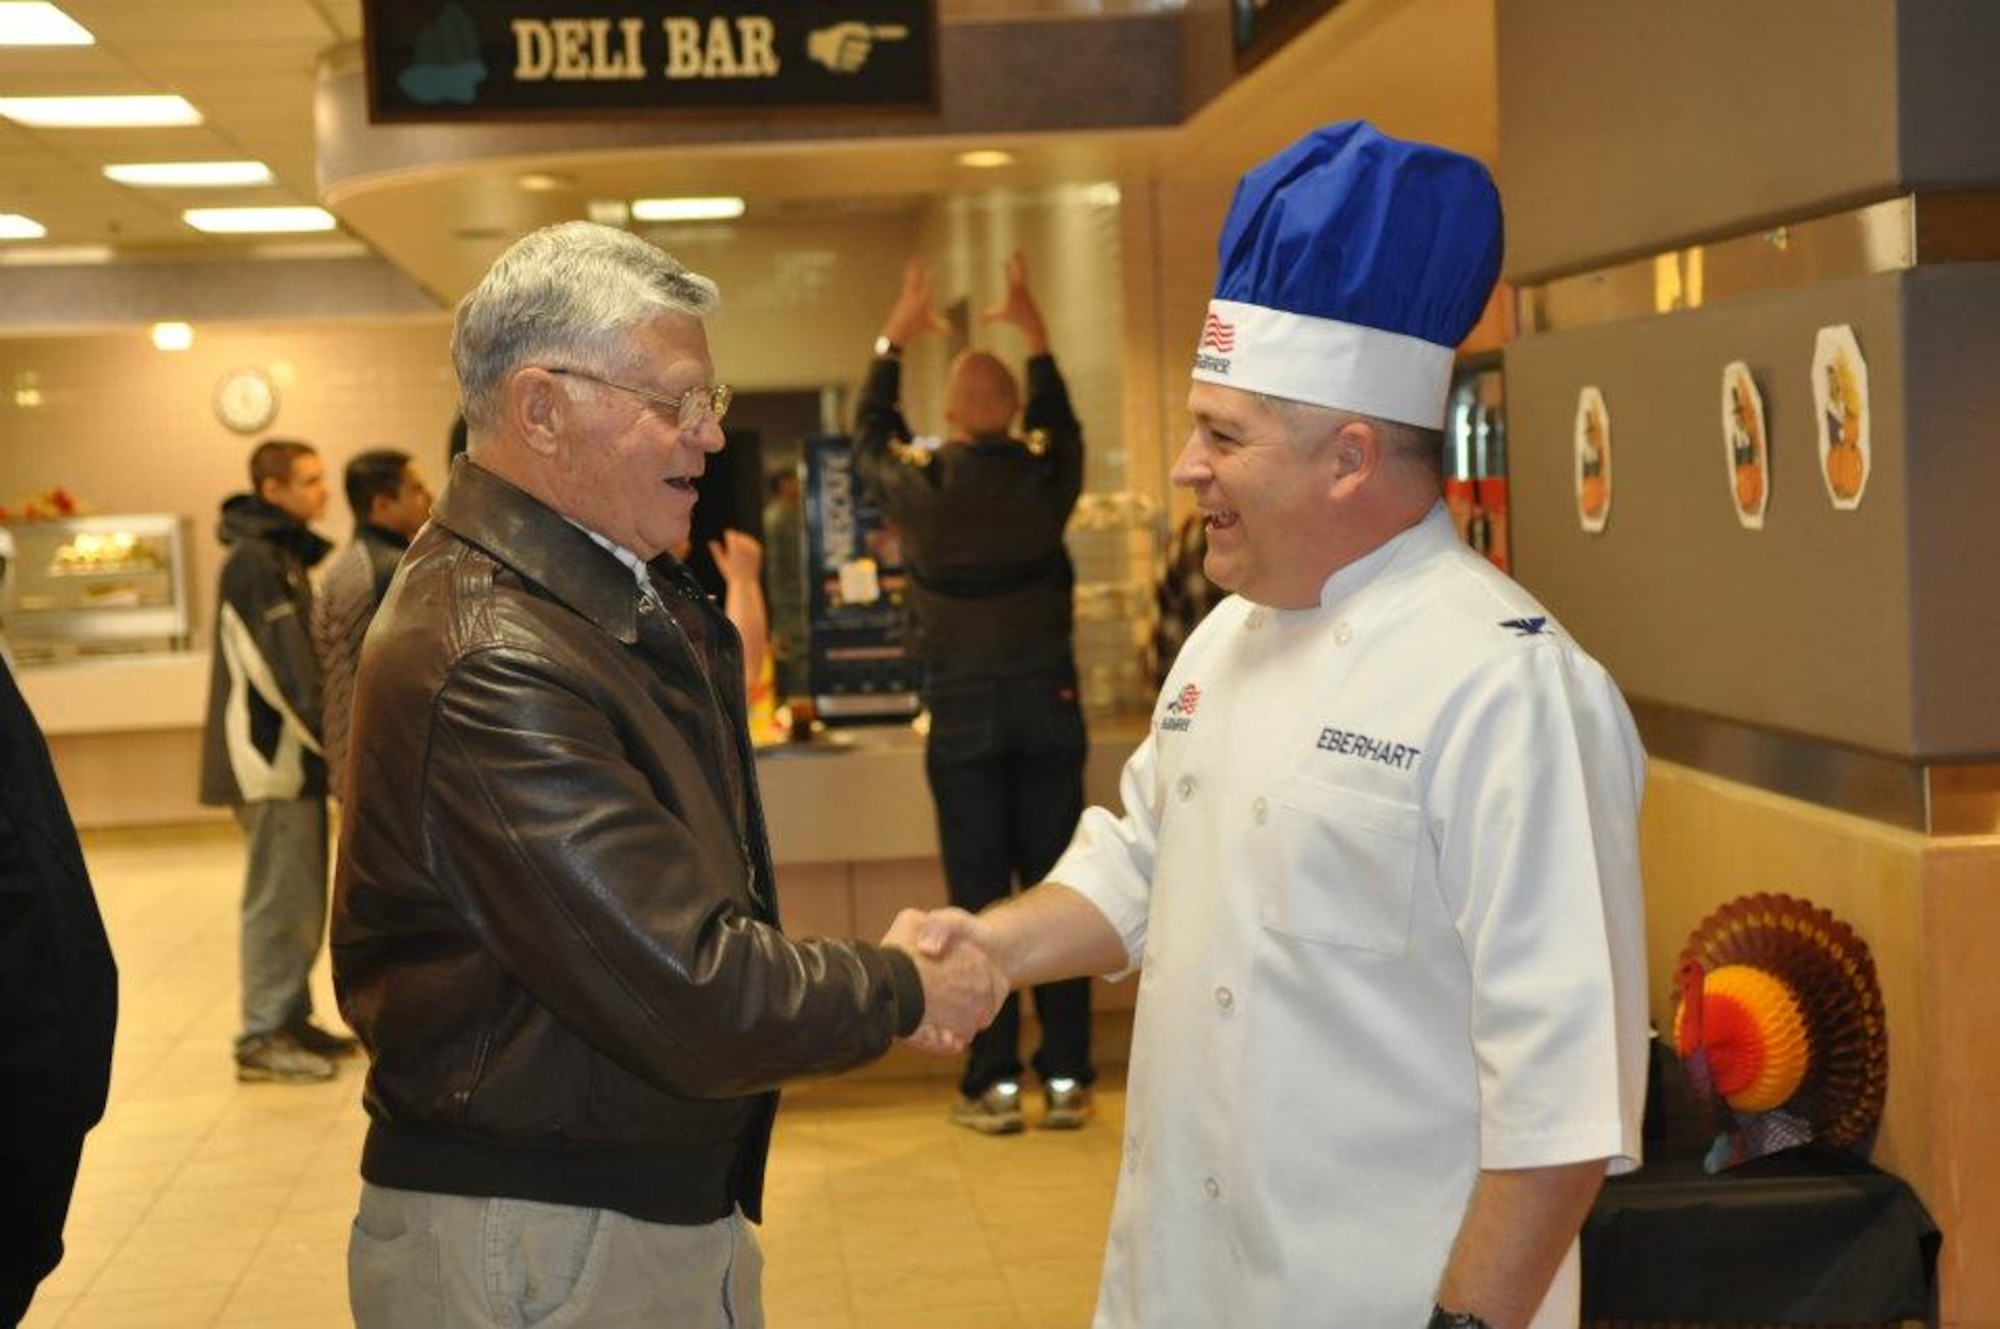 Col. Paul Eberhart, 62nd Operations Group commander, greets a retiree during the Thanksgiving Day meal Nov. 24, 2011 at the Olympic Dining Facility, Joint Base Lewis-McChord, Wash. (U.S. Air Force photo/Tech. Sgt. Oshawn Jefferson)